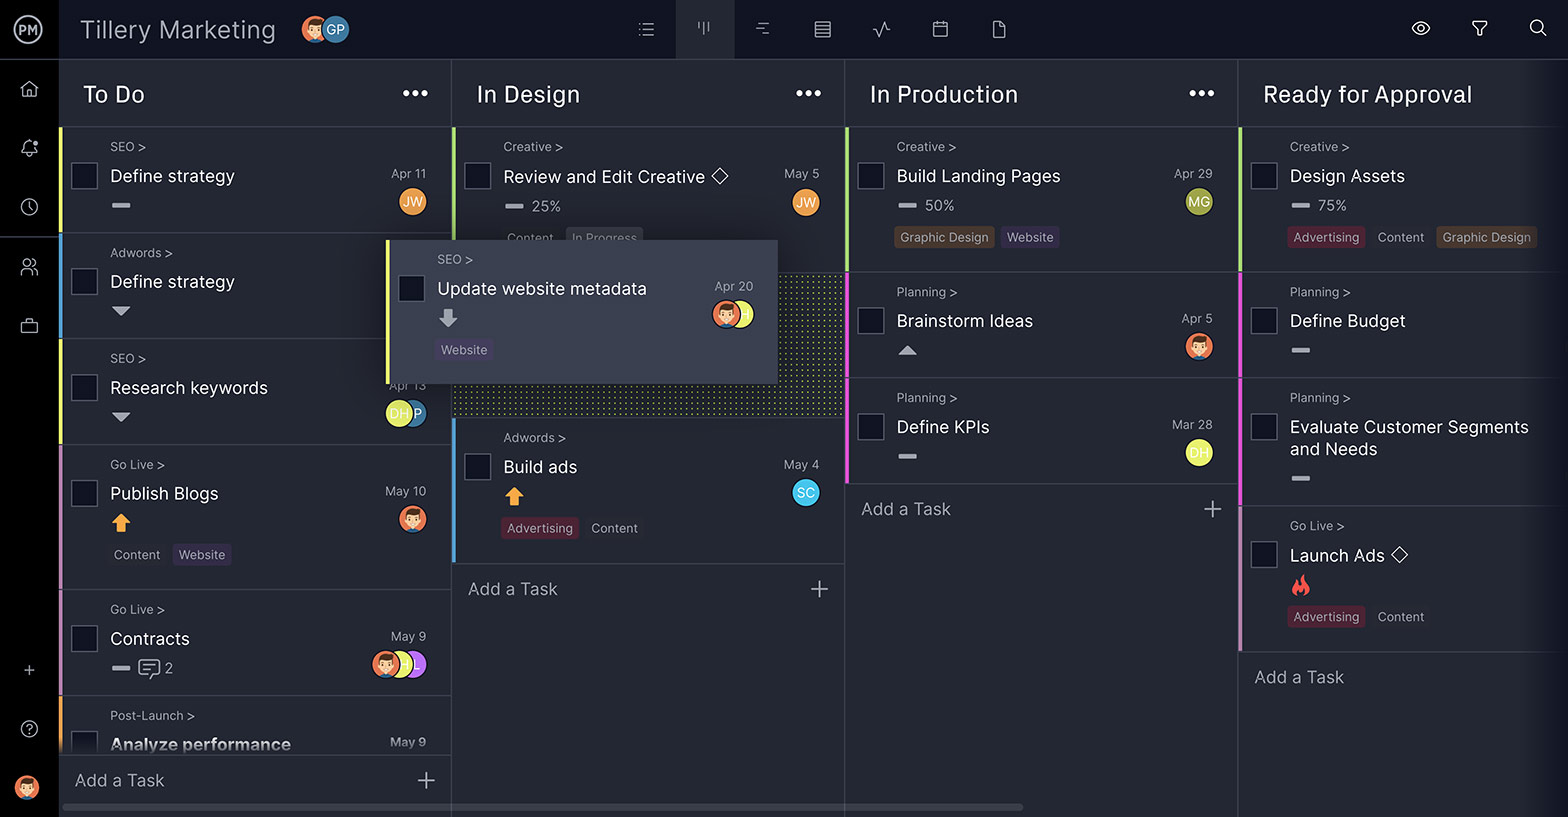 Manage projects and programs with ProjectManager's kanban board